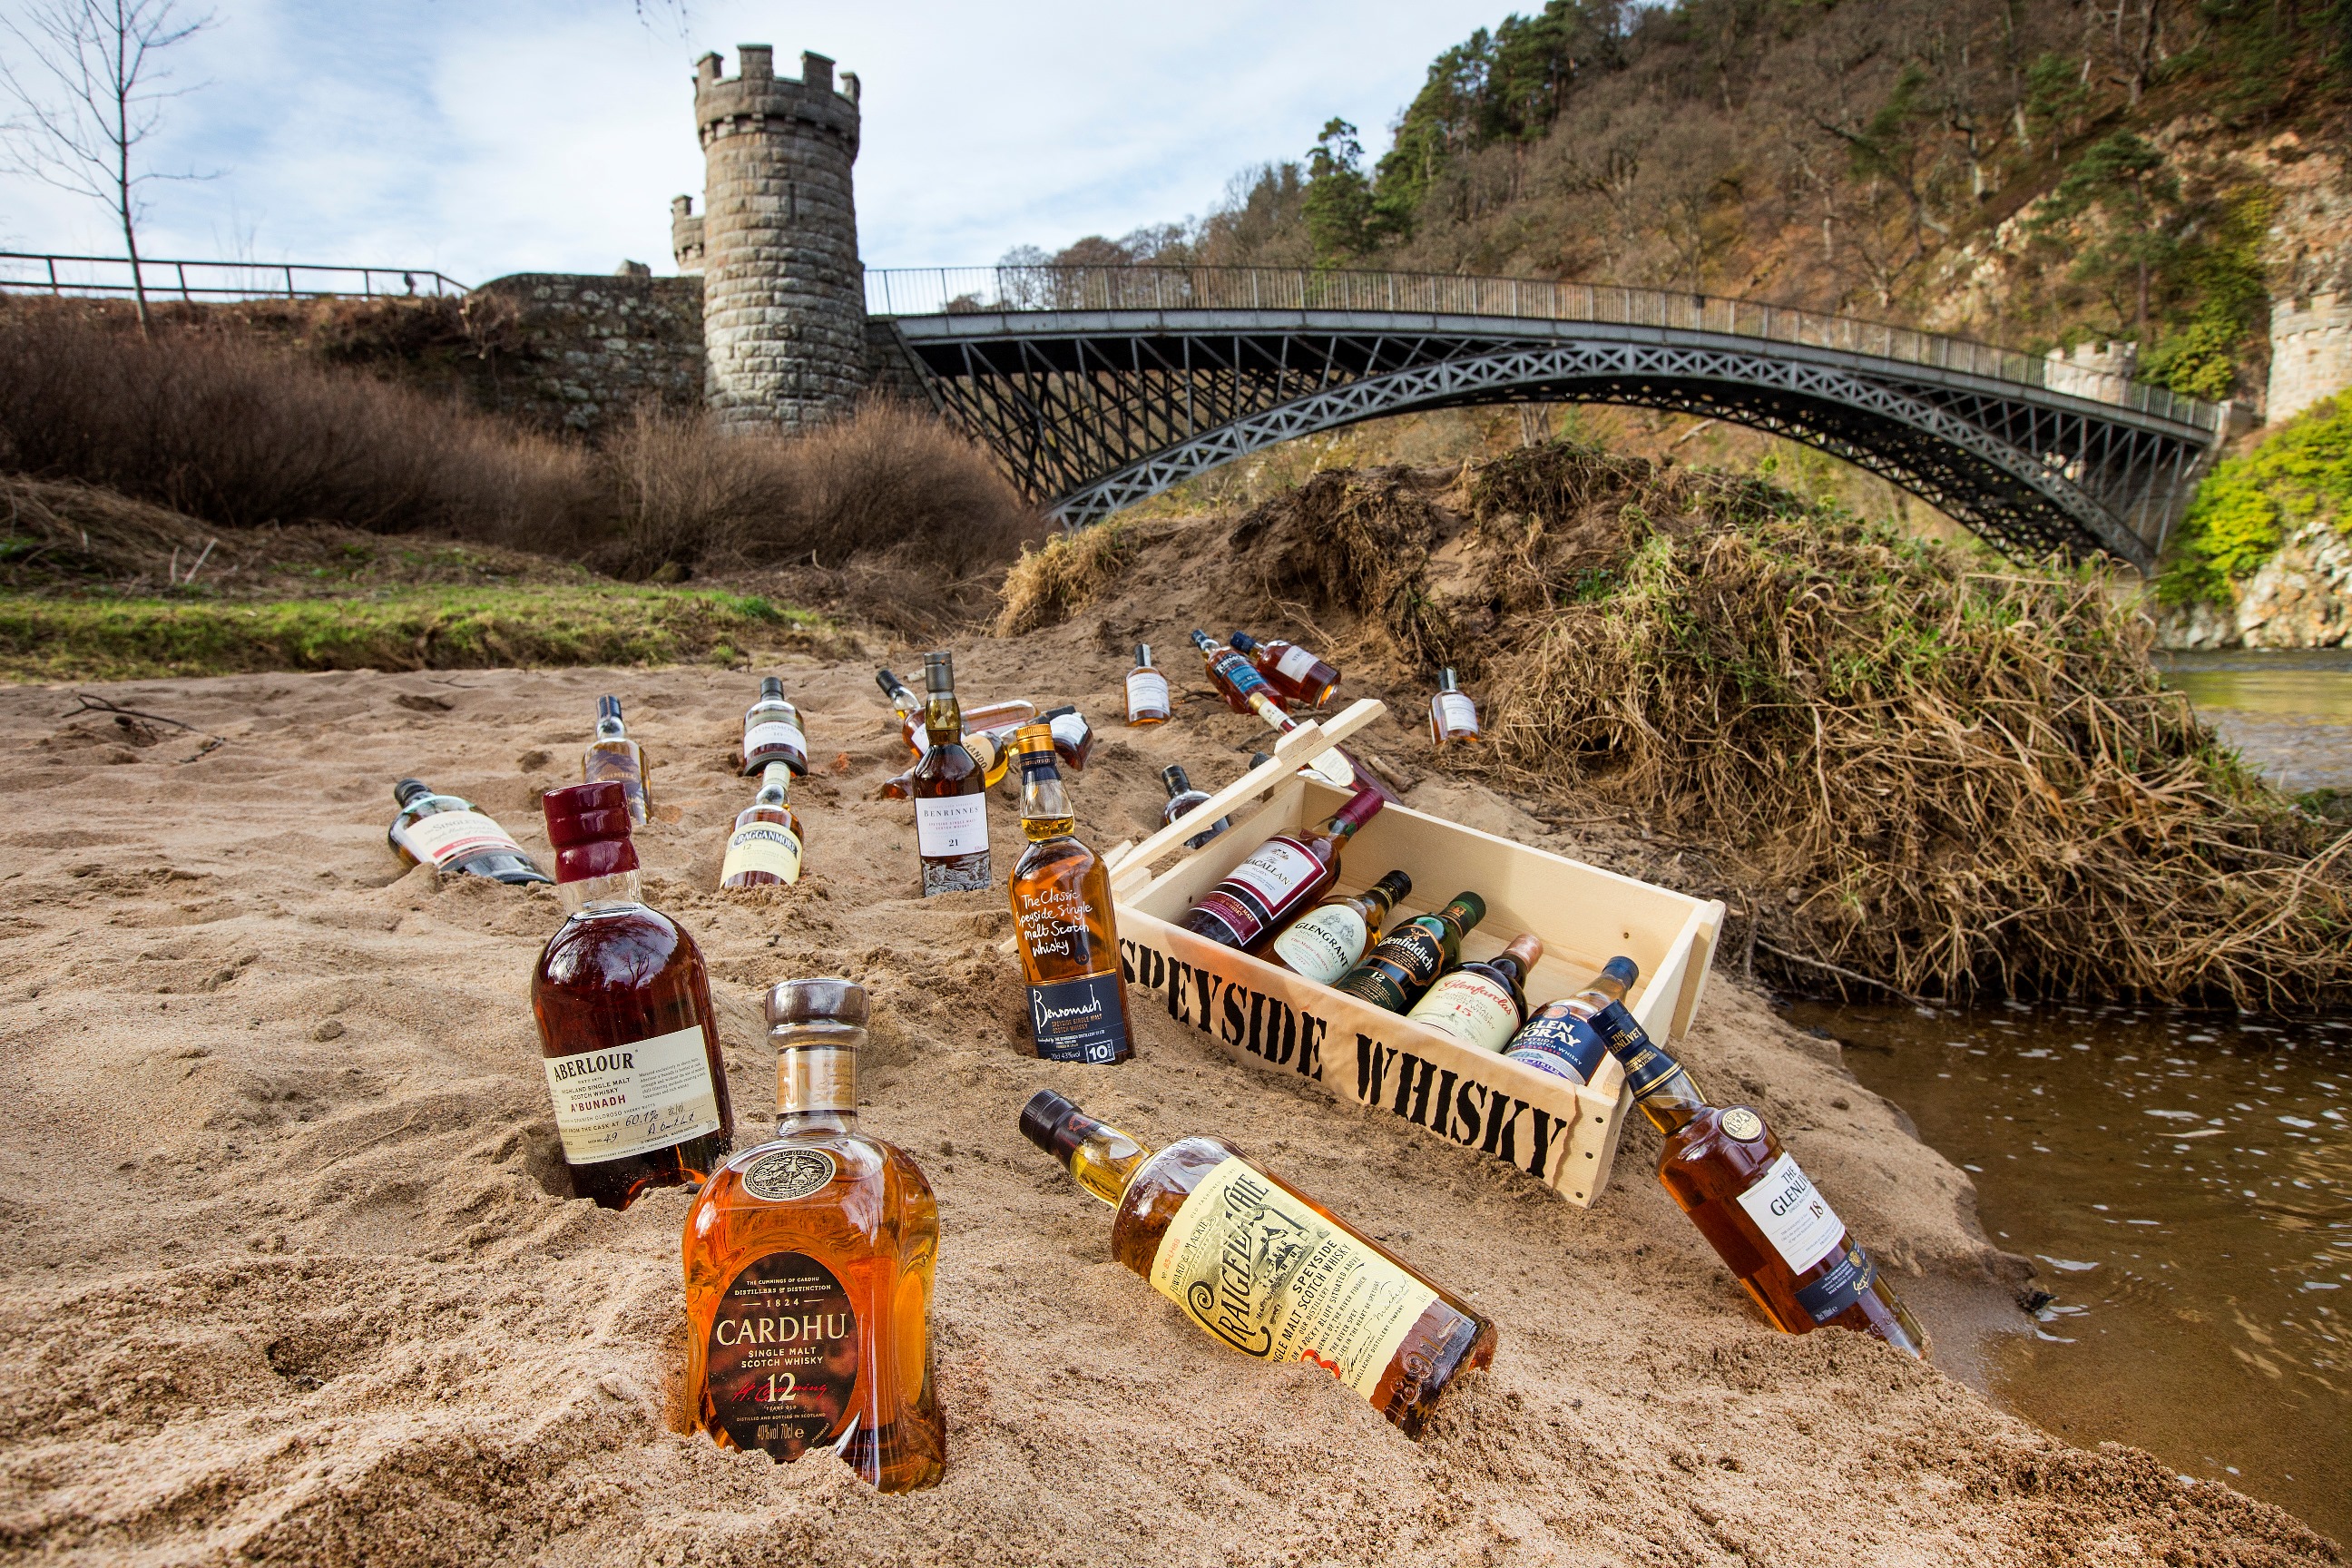 There will be plenty of whisky experiences for visitors to enjoy.